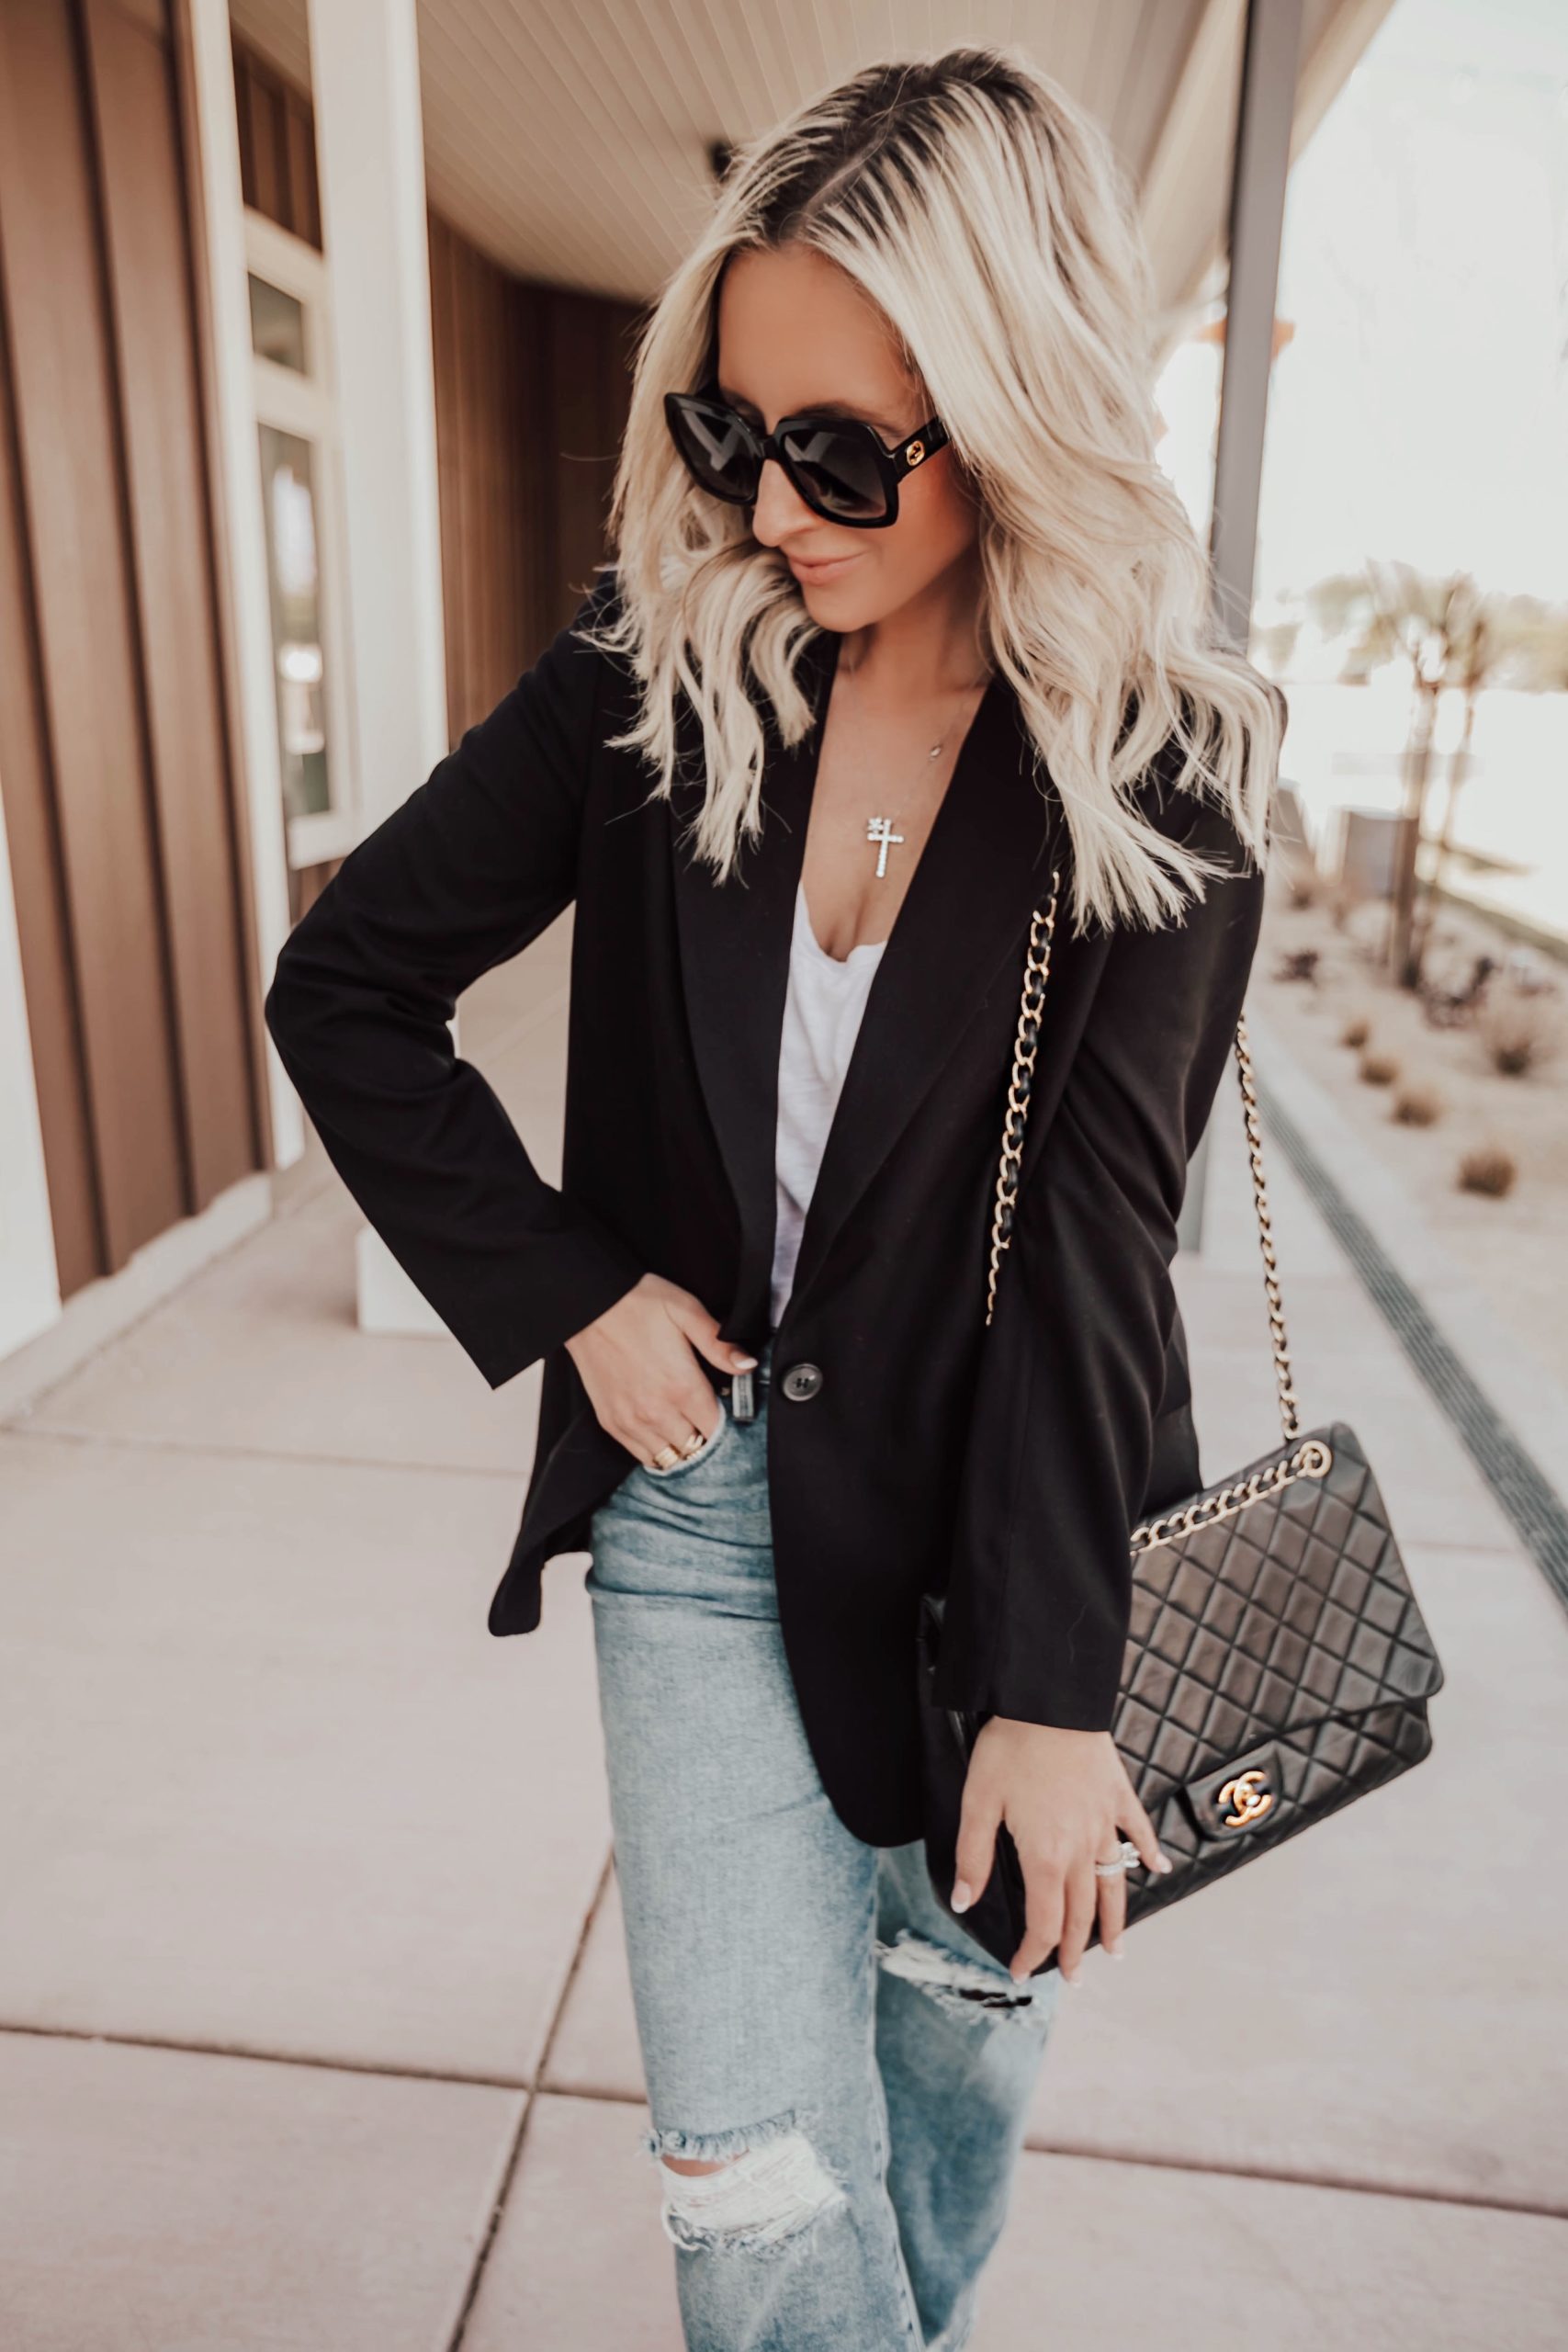 Reno blogger, Emily Wieczorek, from the Ashley and Emily blog shares The 10 Best Jackets For Spring that you need now!